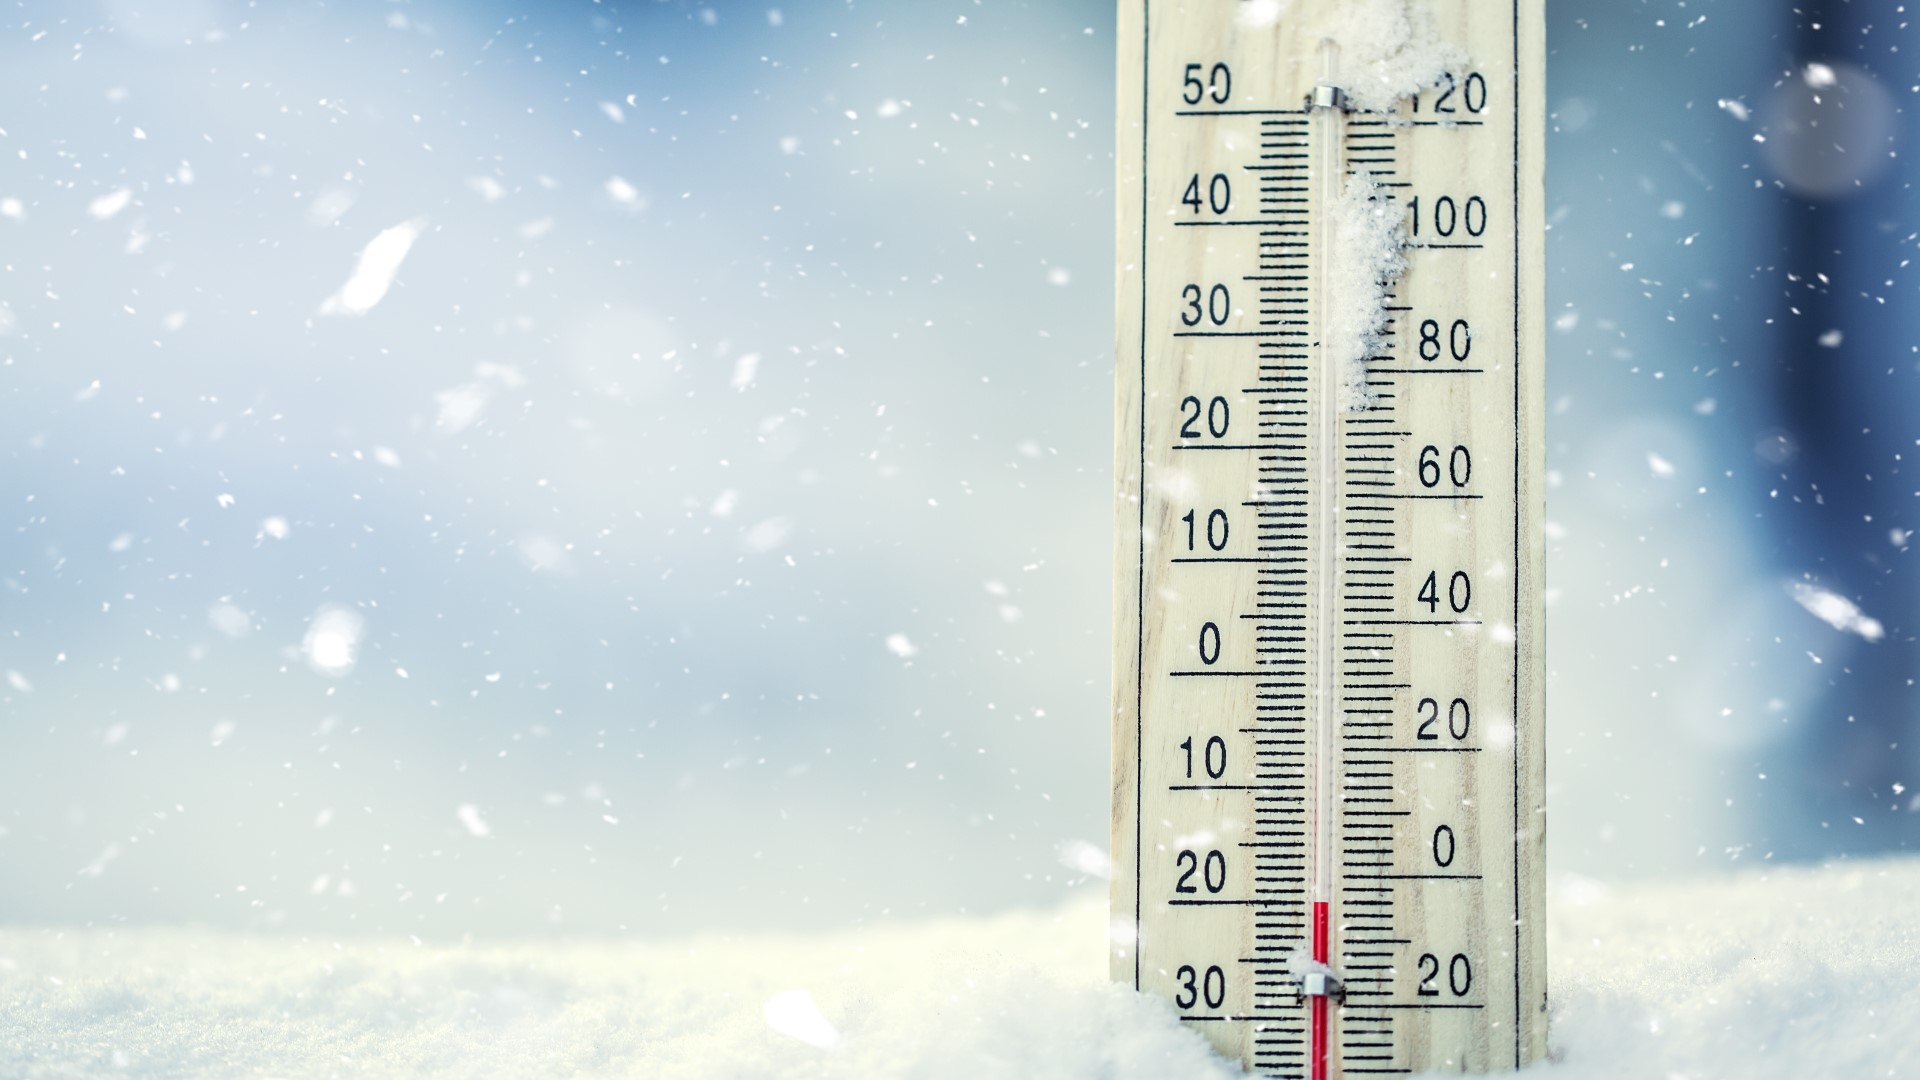 Iowa winters can bring dangerous weather conditions, so warming centers can be lifesaving. A full list of metro locations is available on weareiowa.com.